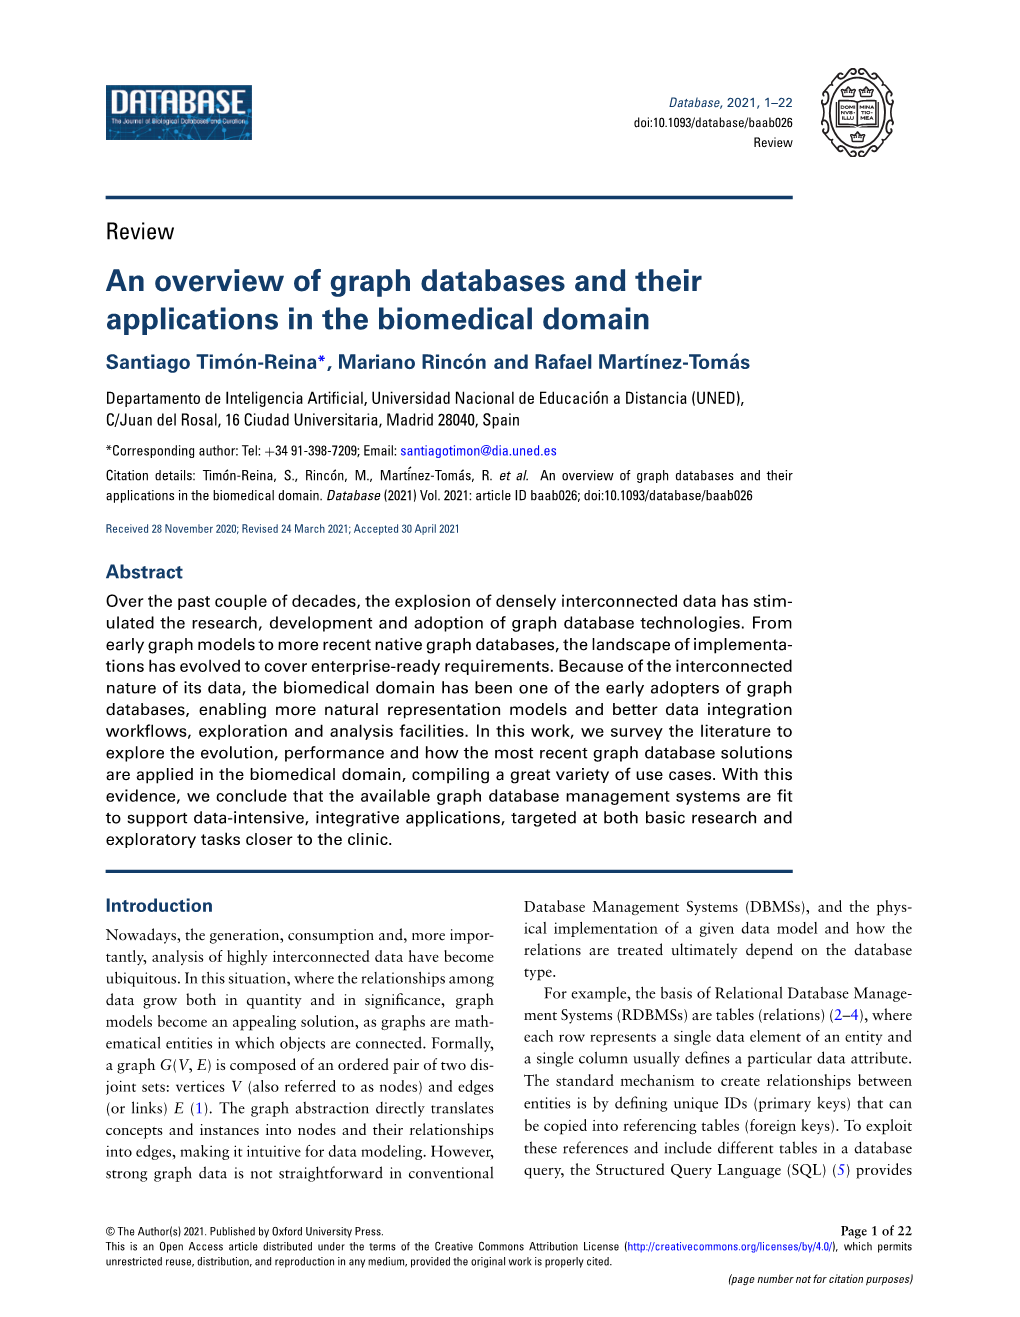 An Overview of Graph Databases and Their Applications in the Biomedical Domain Santiago Timon-Reina´ *, Mariano Rincon´ and Rafael Martínez-Tom´As